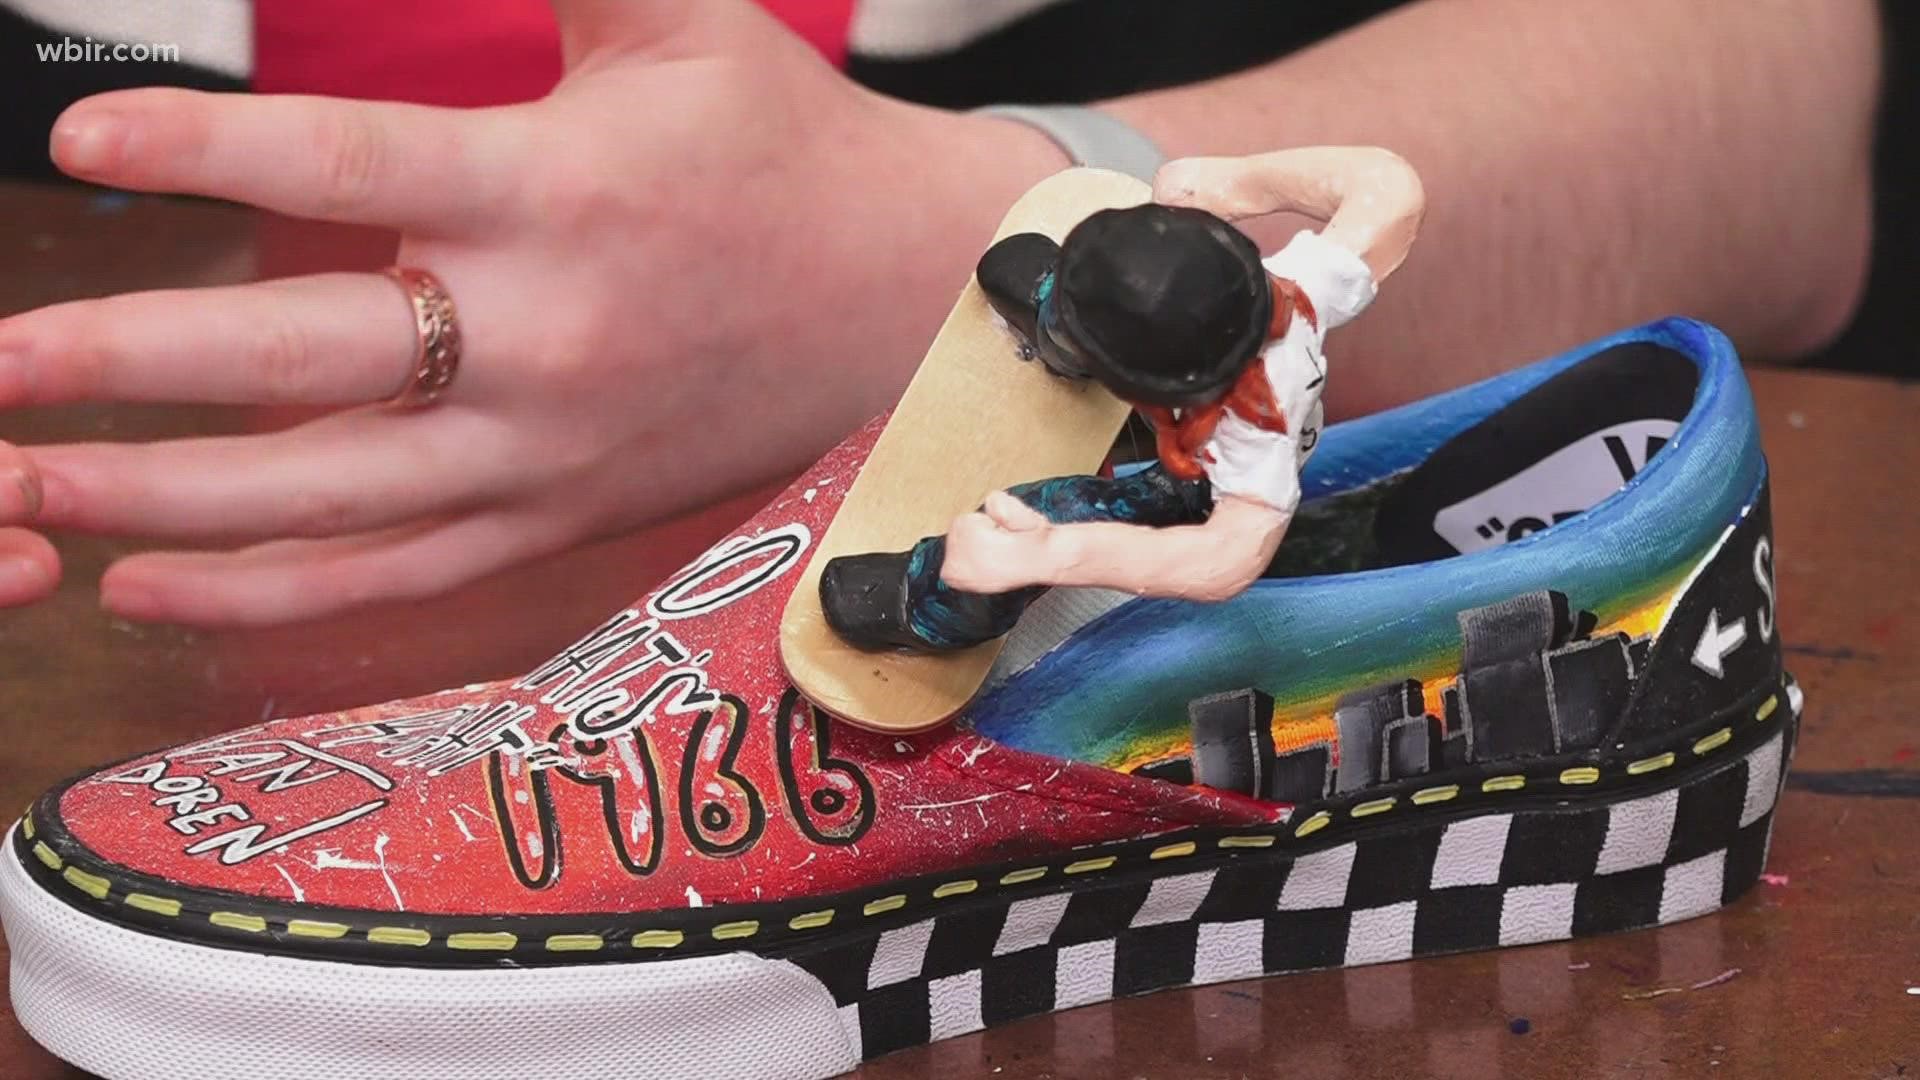 The 2022 Vans Custom Culture Contest will give $50,000 to whichever school designs the best shoes around specific themes, and hometown pride.